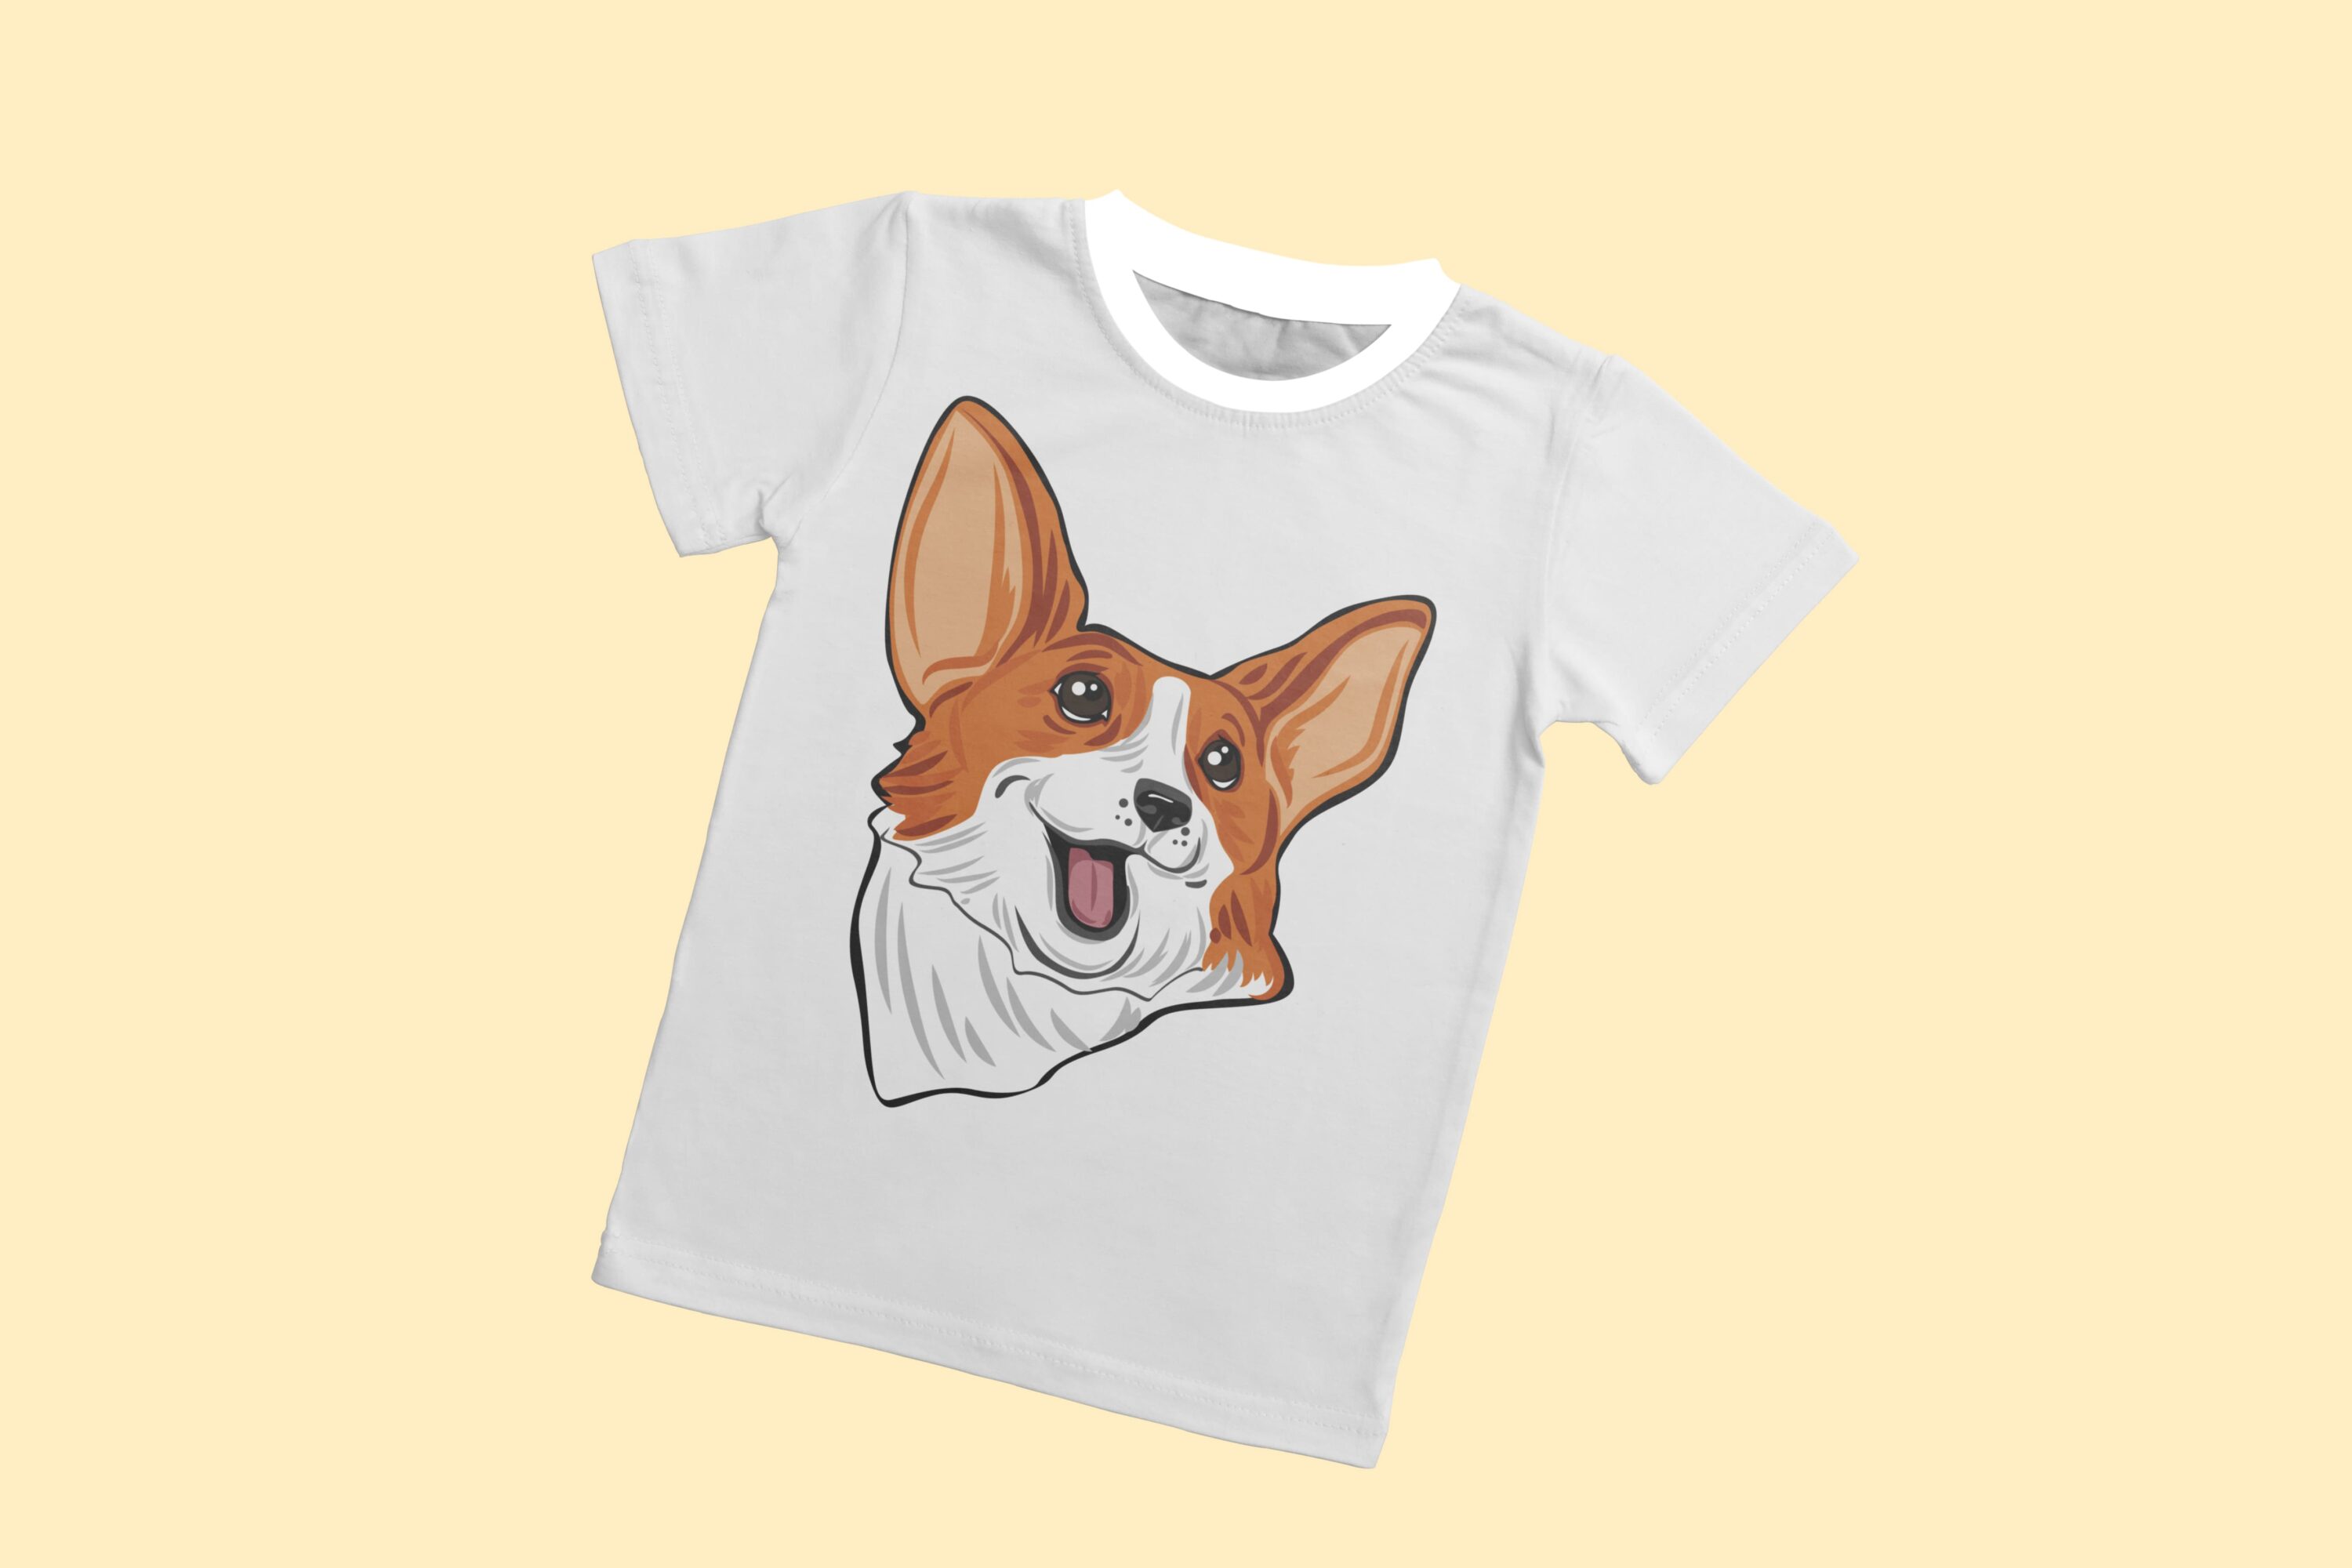 Cool corgi face for the different fabrics.